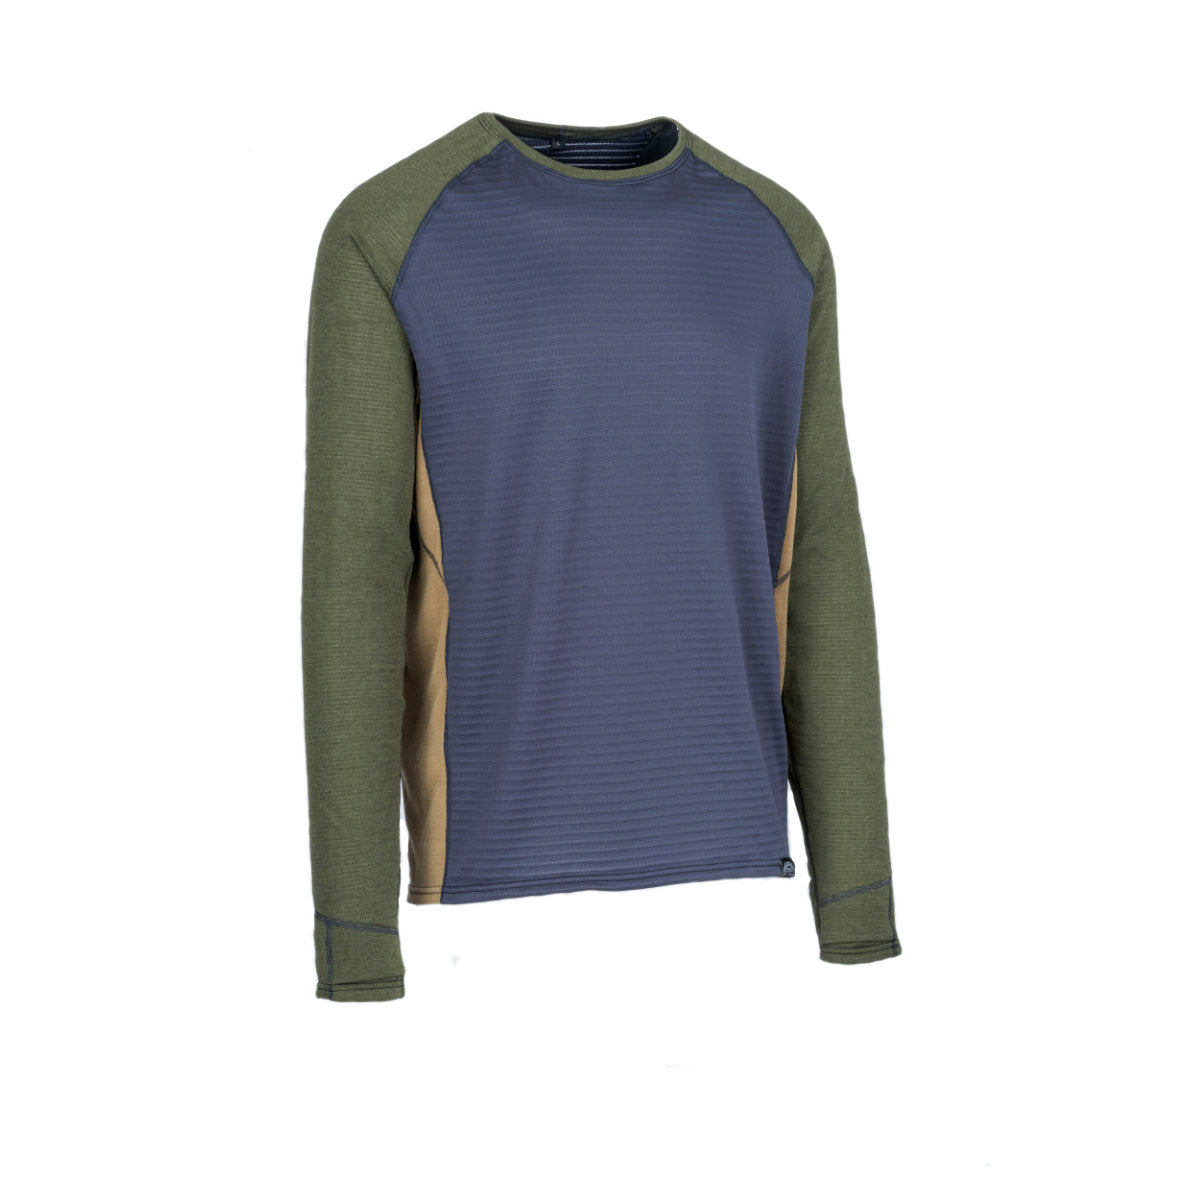 Research | Immersion Baseline Research Polartec® Crewneck Shirt – Immersion